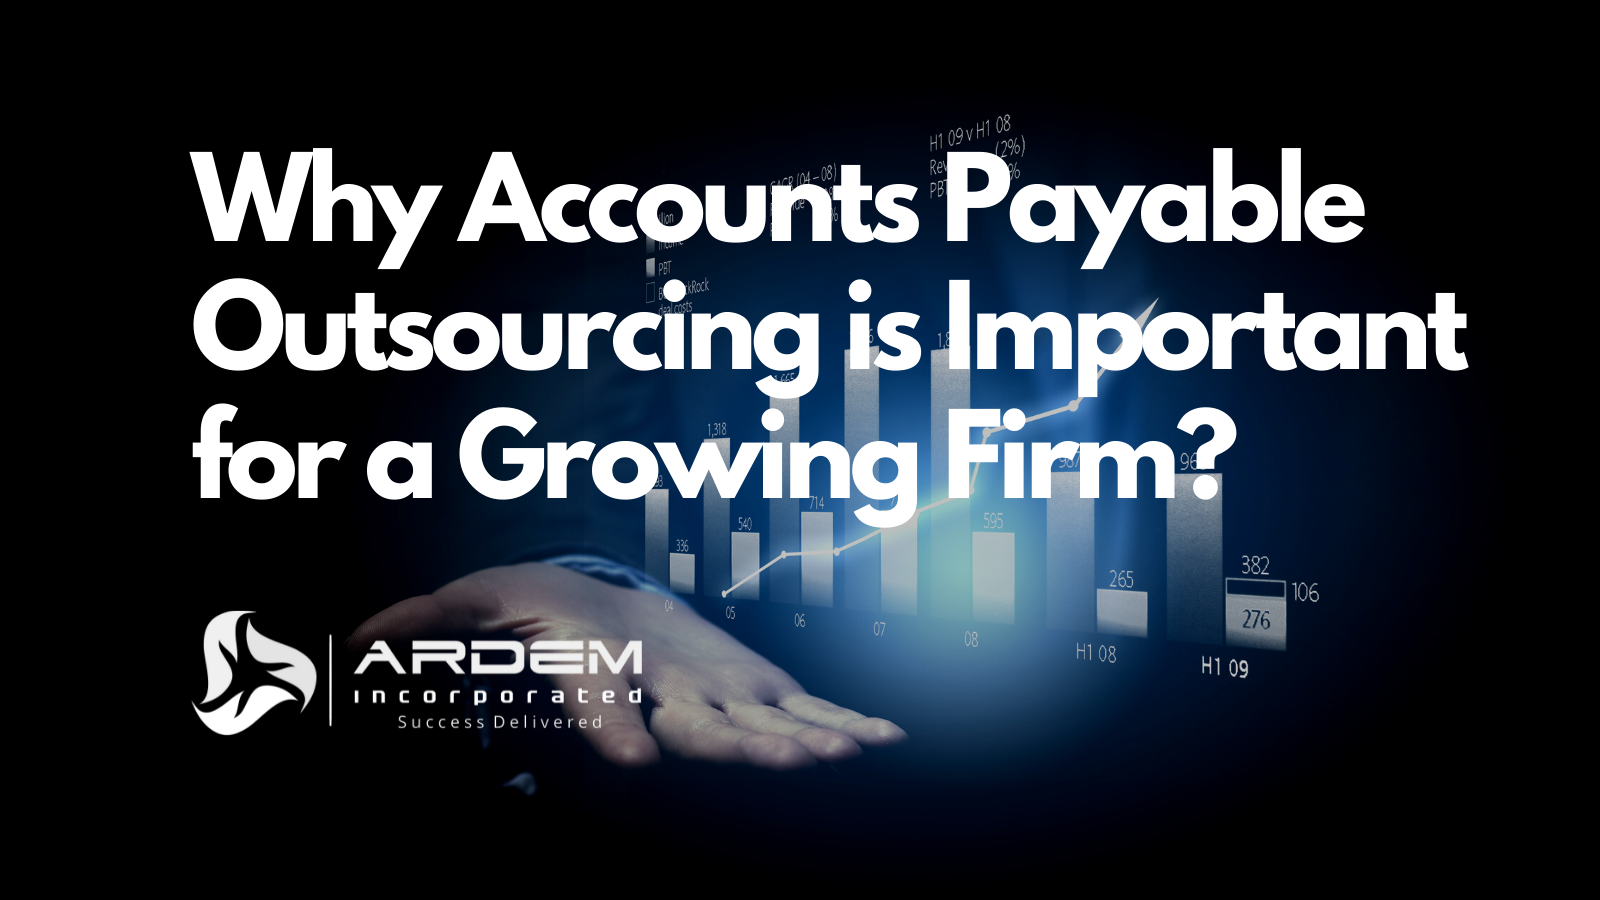 accounts payable outsourcing accounting